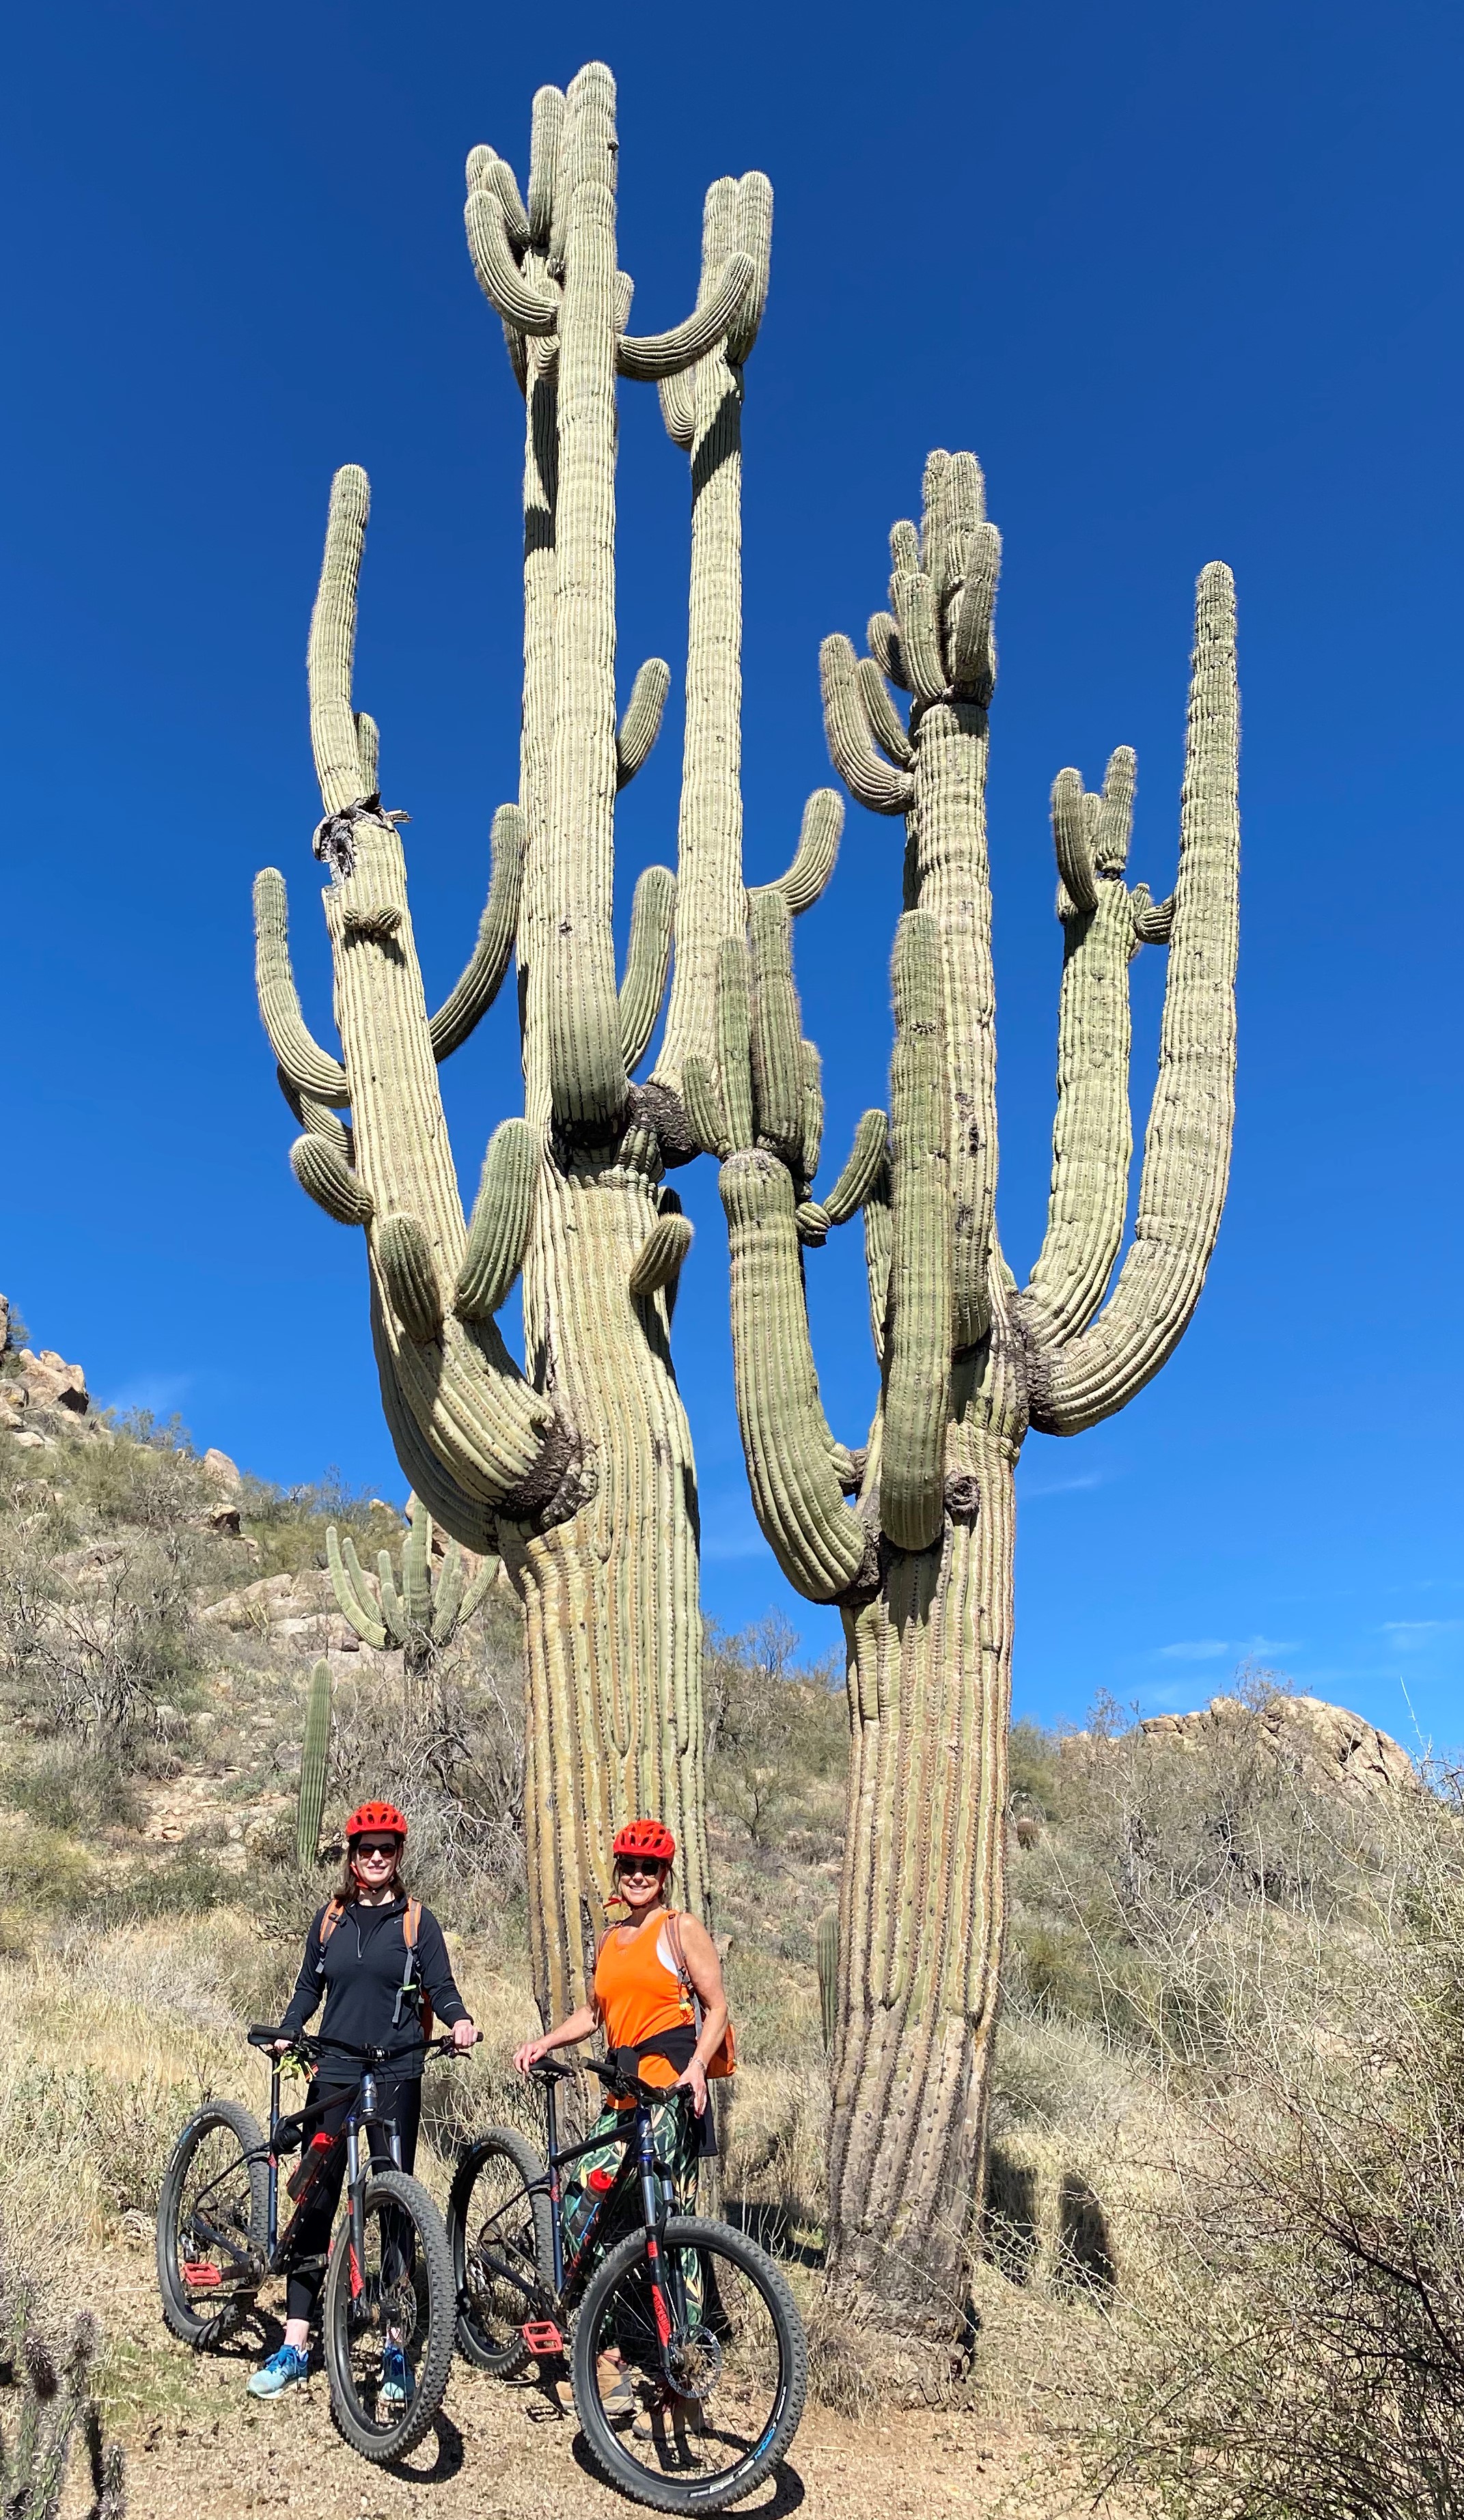 Pausing for a photo in front of an iconic Saguaro Cactus during a 2020 girlfriends trip with the Wild Bunch are Kate Thornton (left) and Jean Heinly.